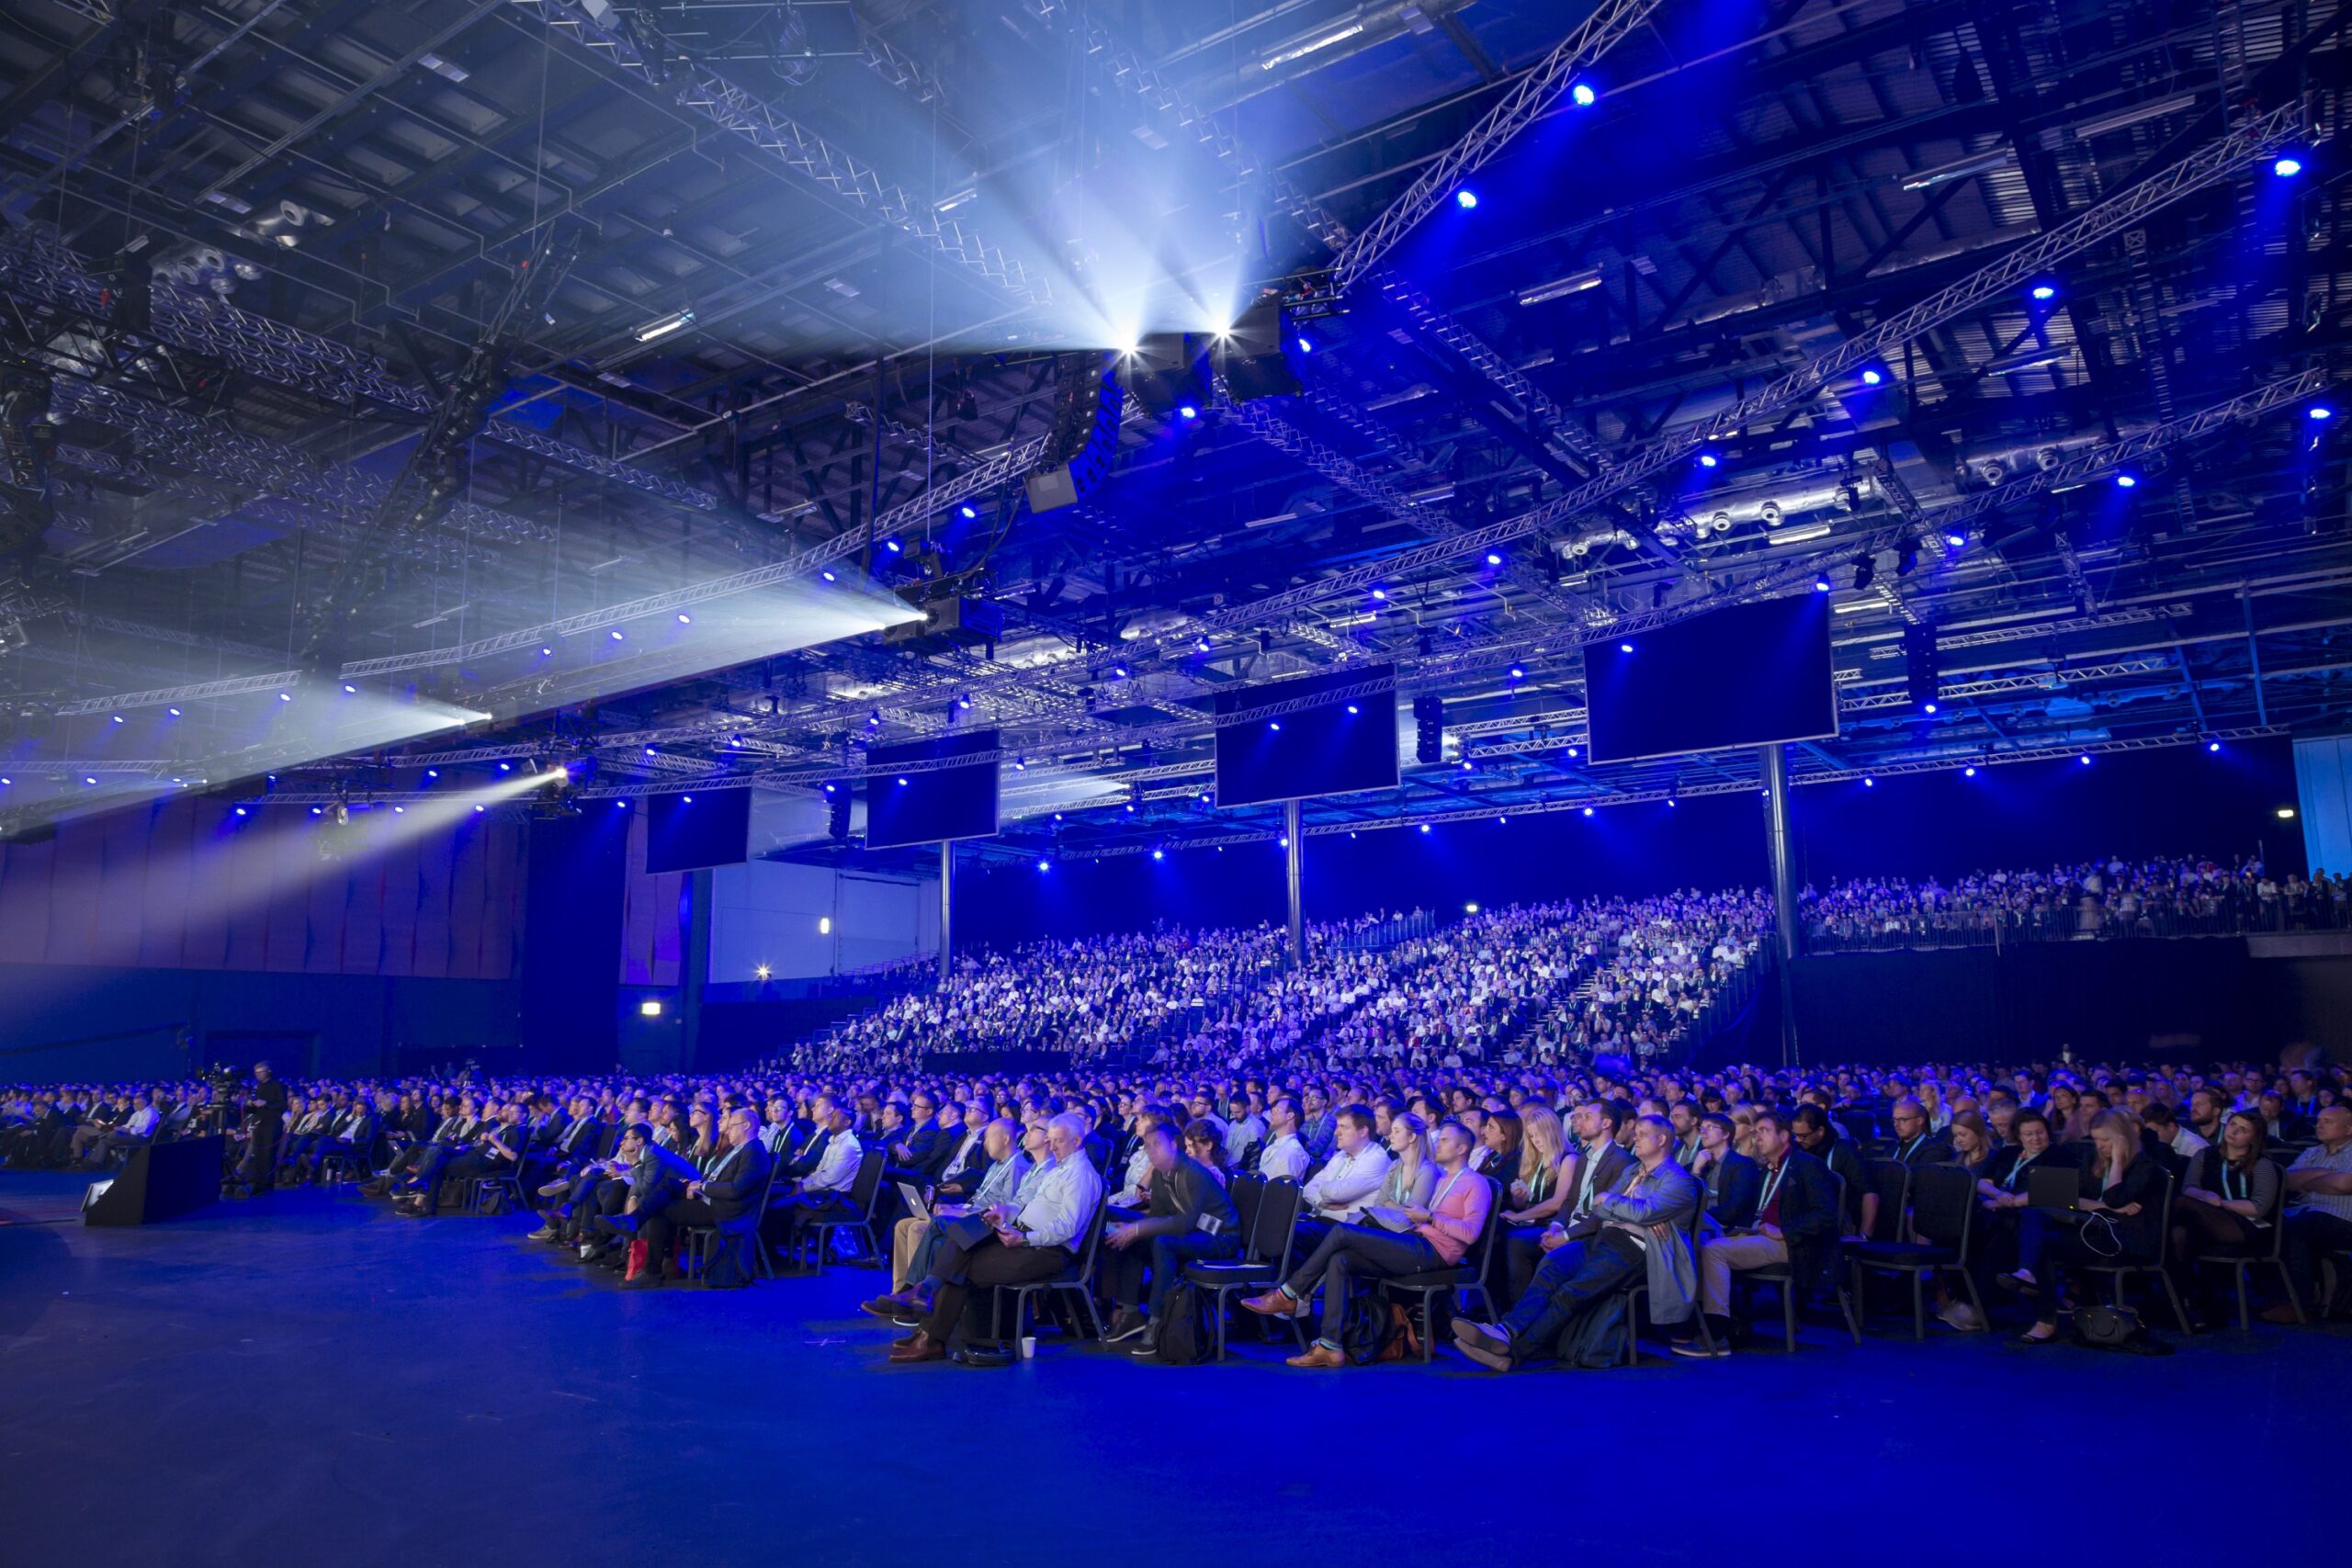 A large crowd in the ExCel event center. Stage lights above them give everything a blue tint.